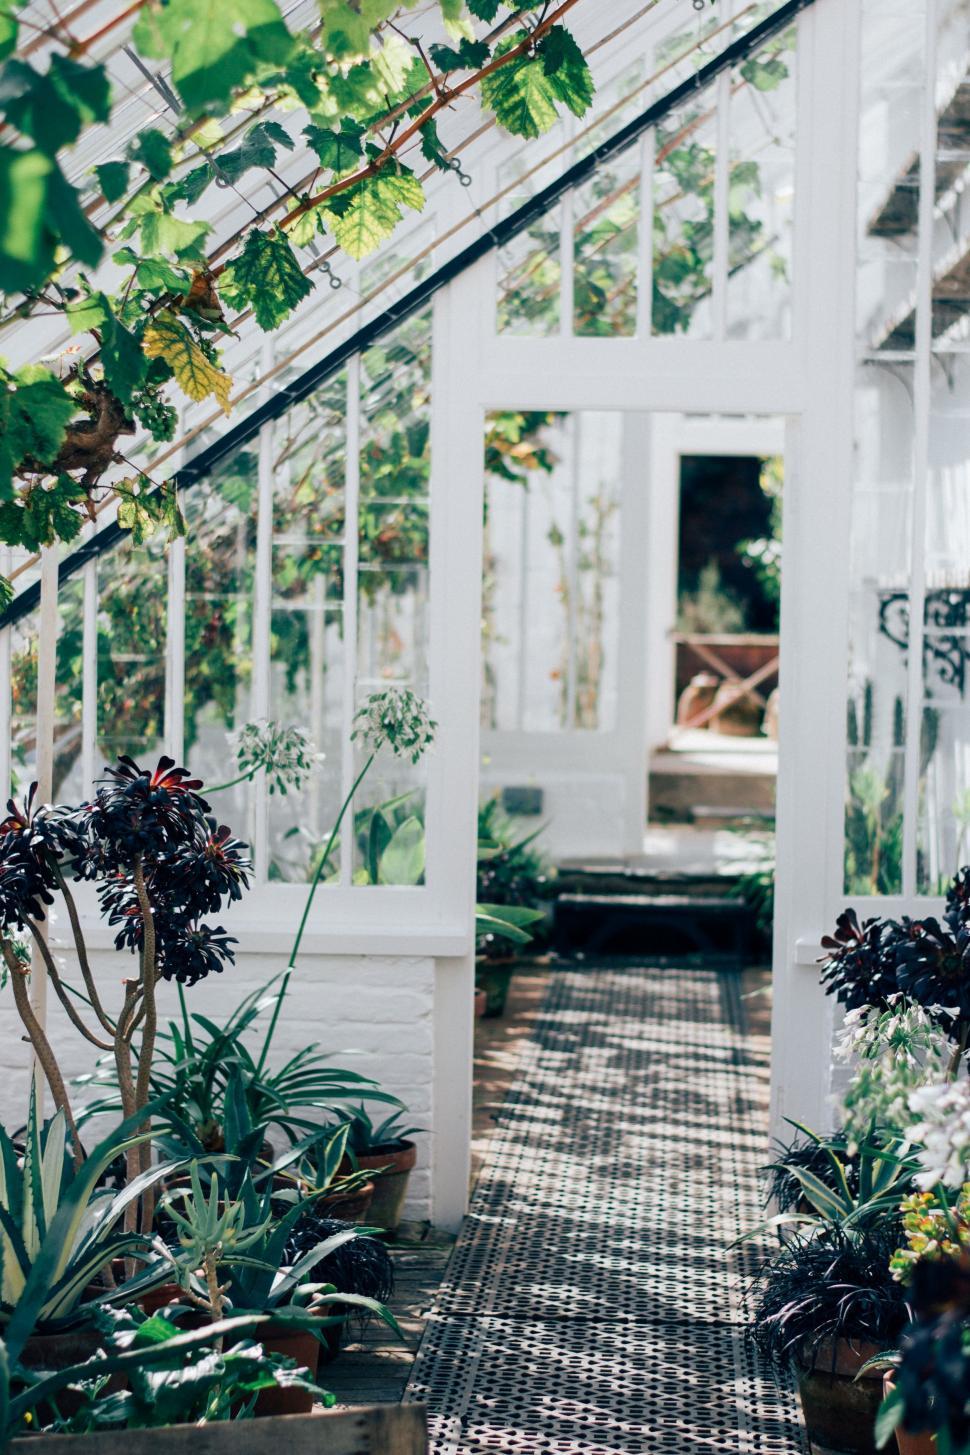 Free Image of White Greenhouse Filled With Plants 